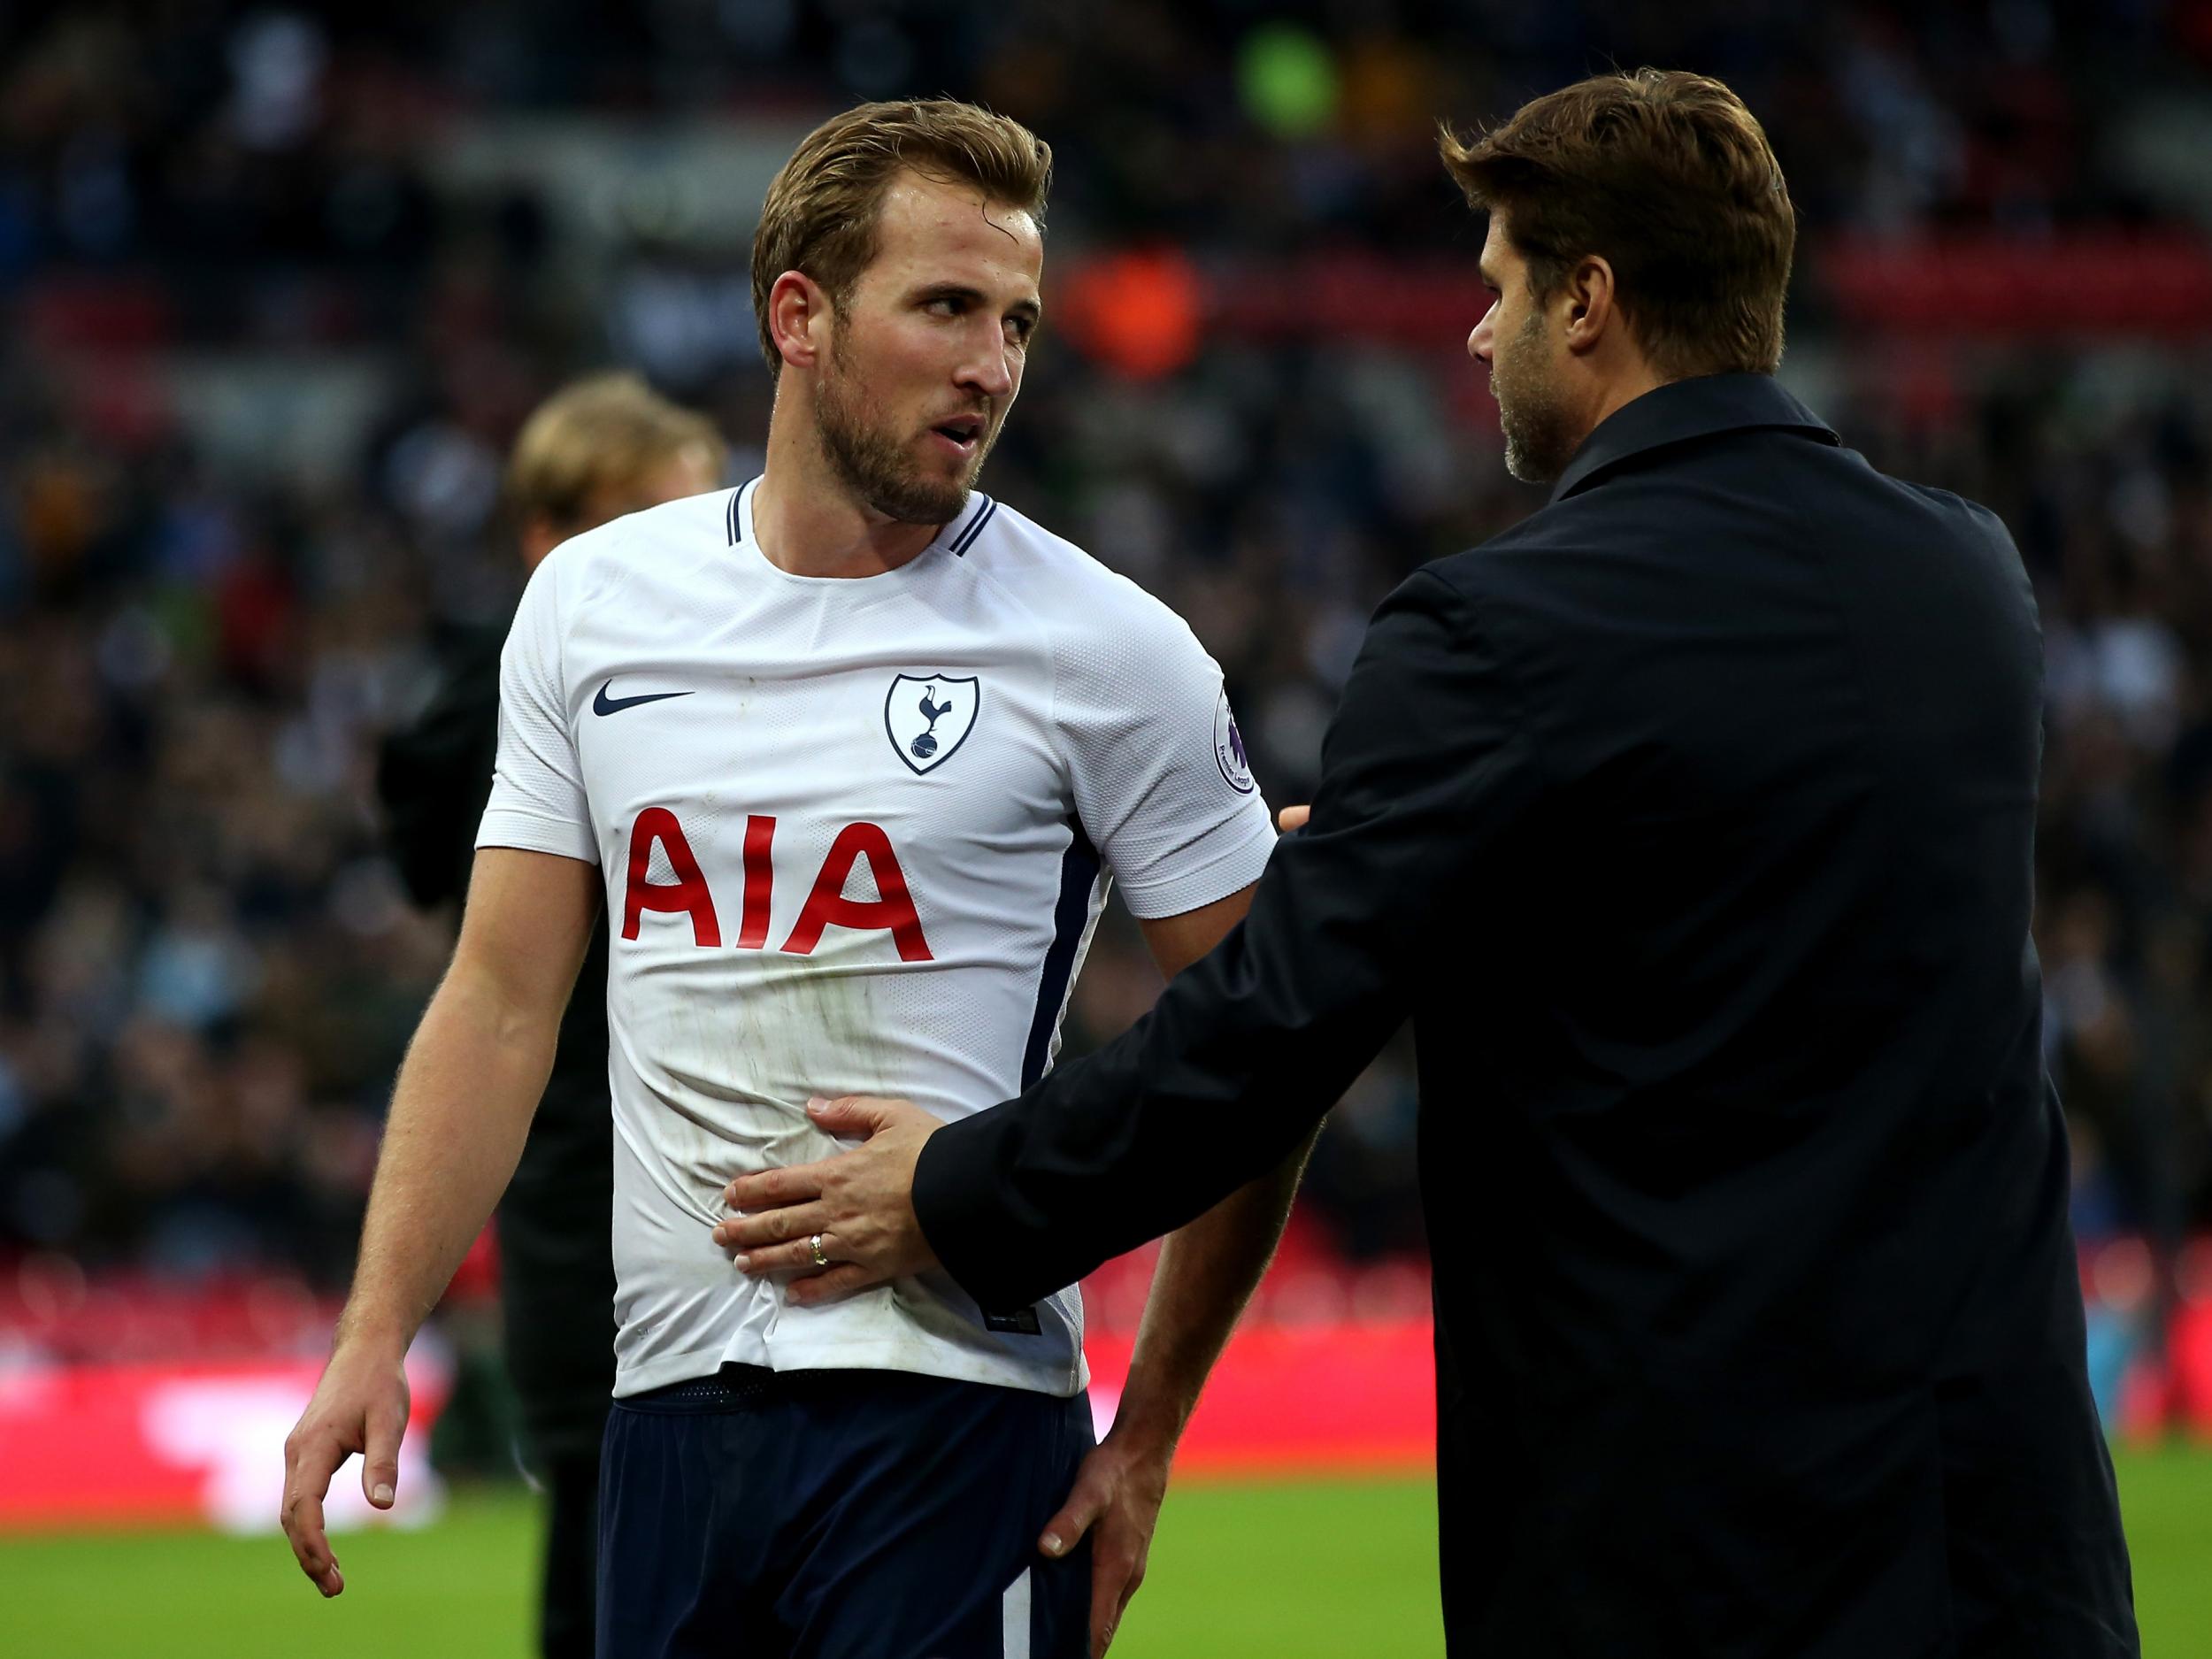 Kane is touch-and-go for Real Madrid on Wednesday